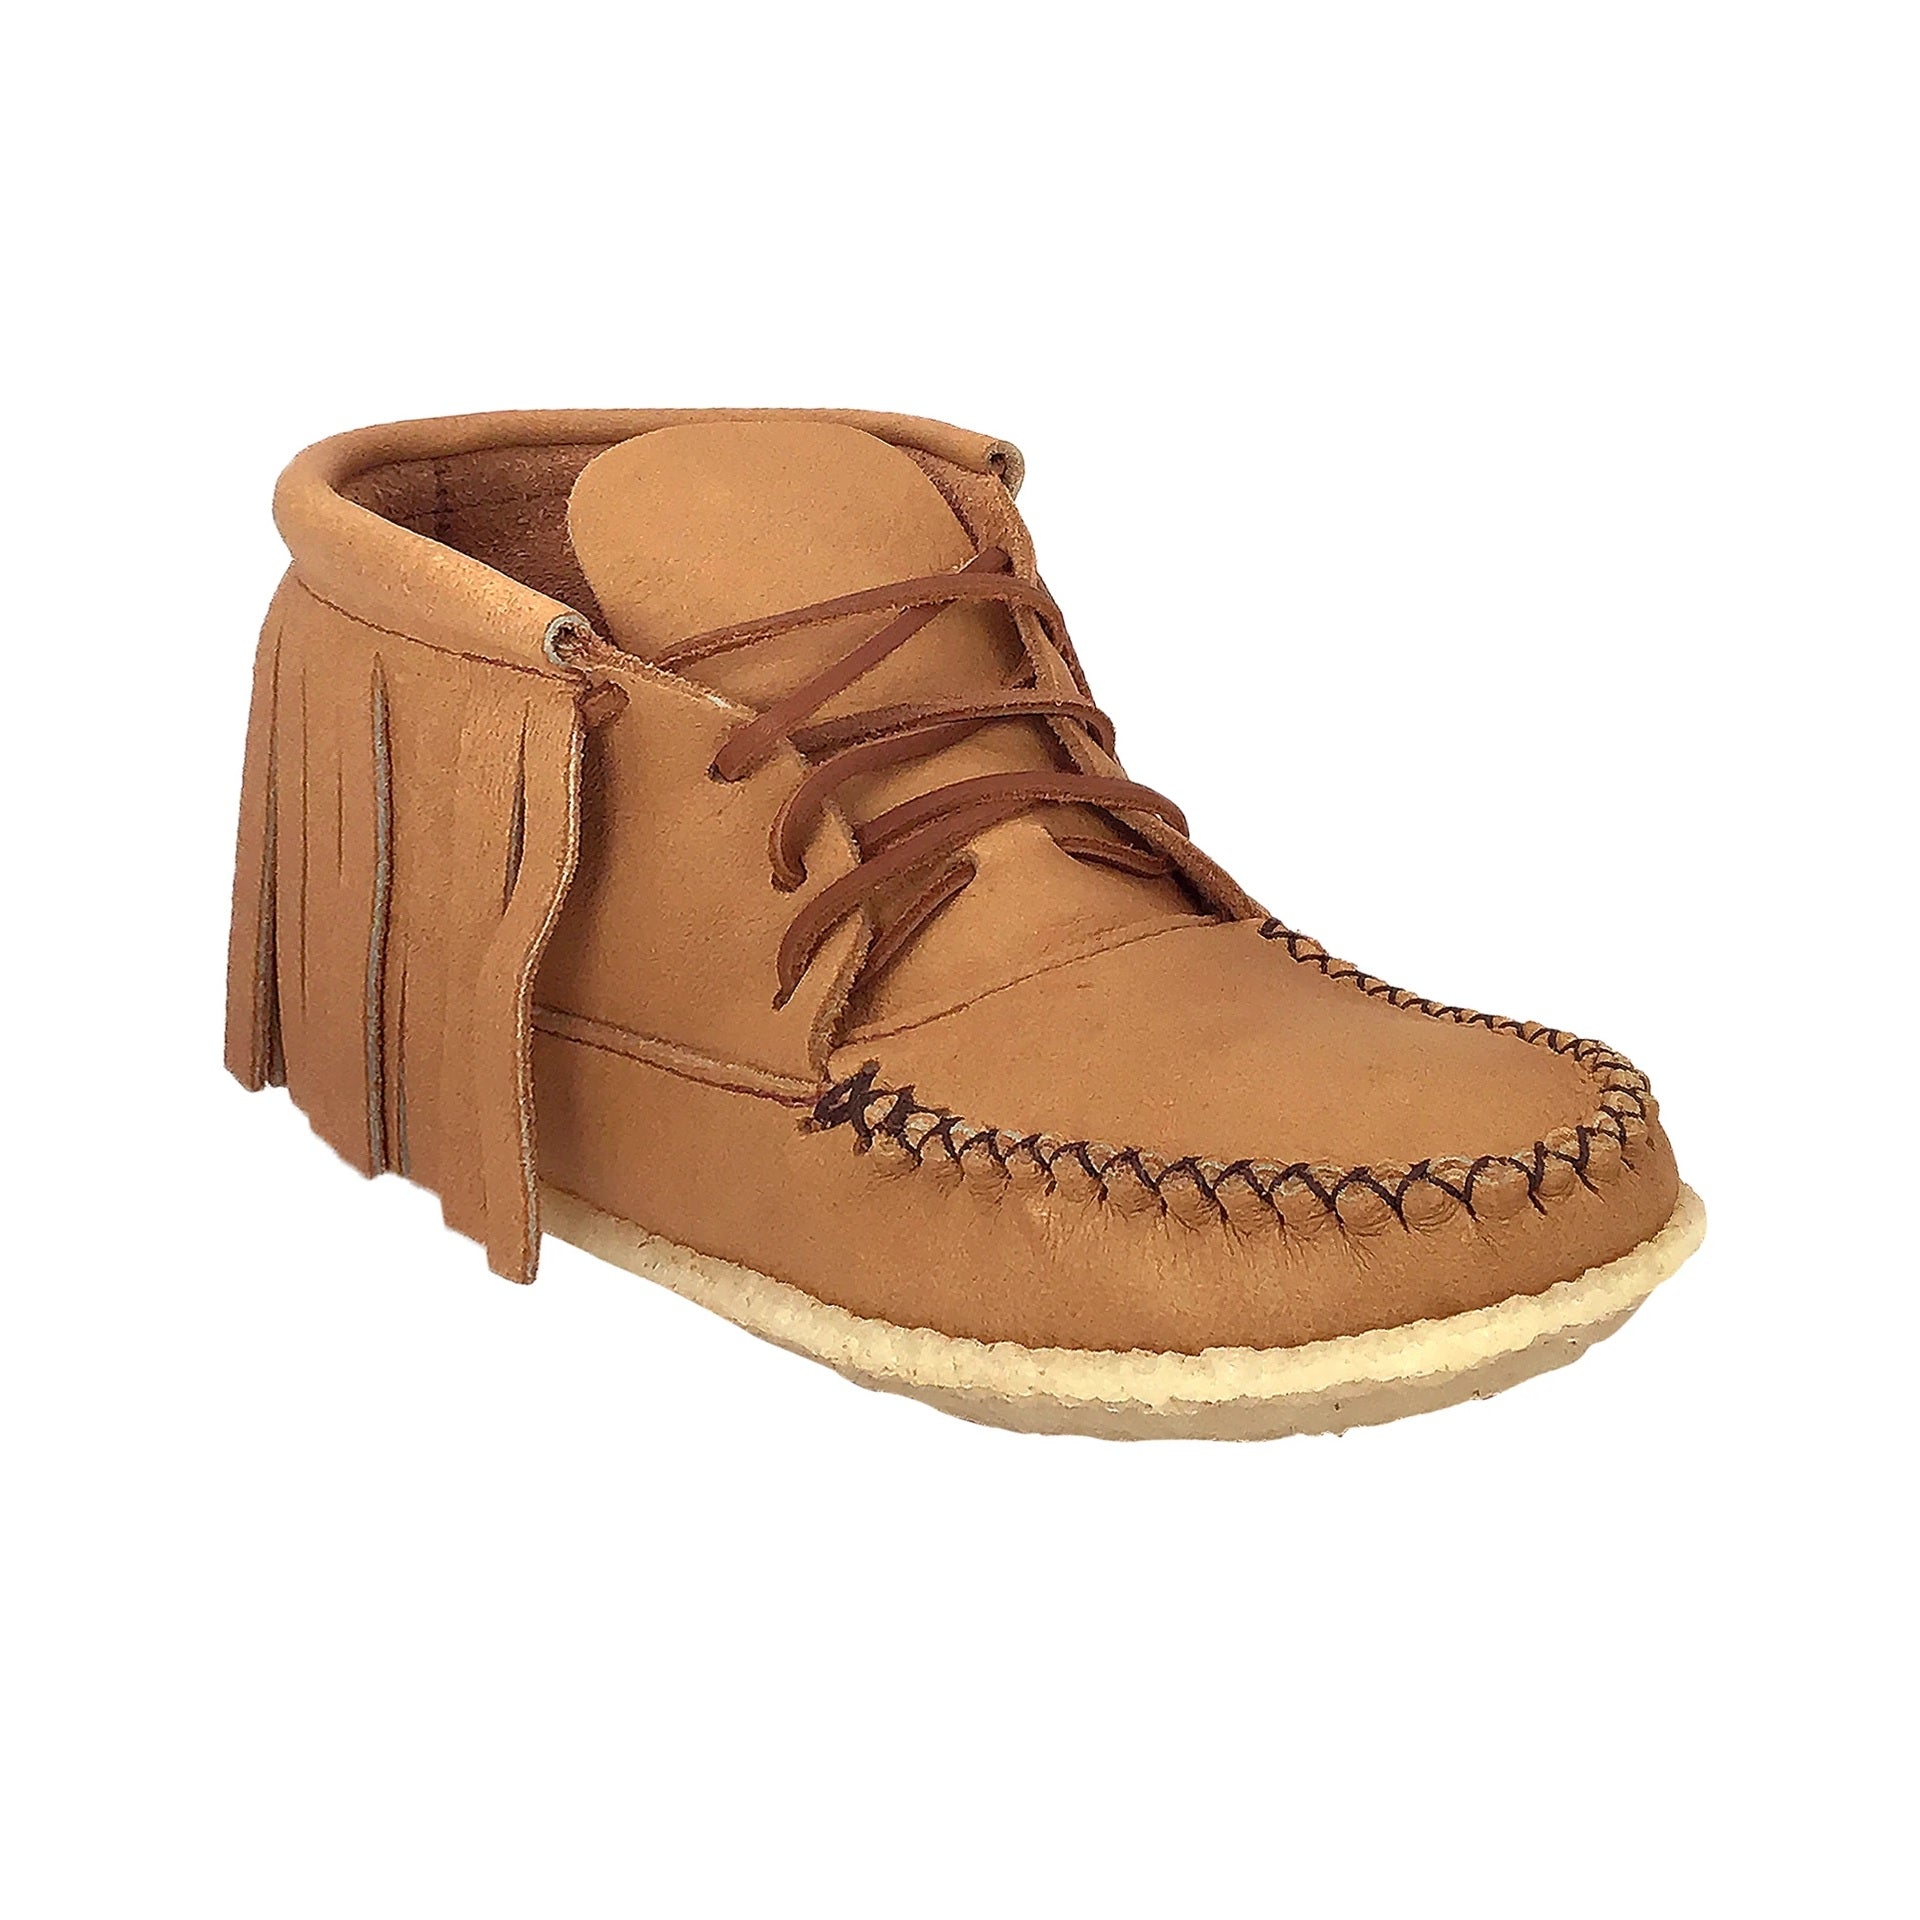 Women's Earthing Moccasin Boots with Copper Rivet Ankle Fringe Crepe Sole